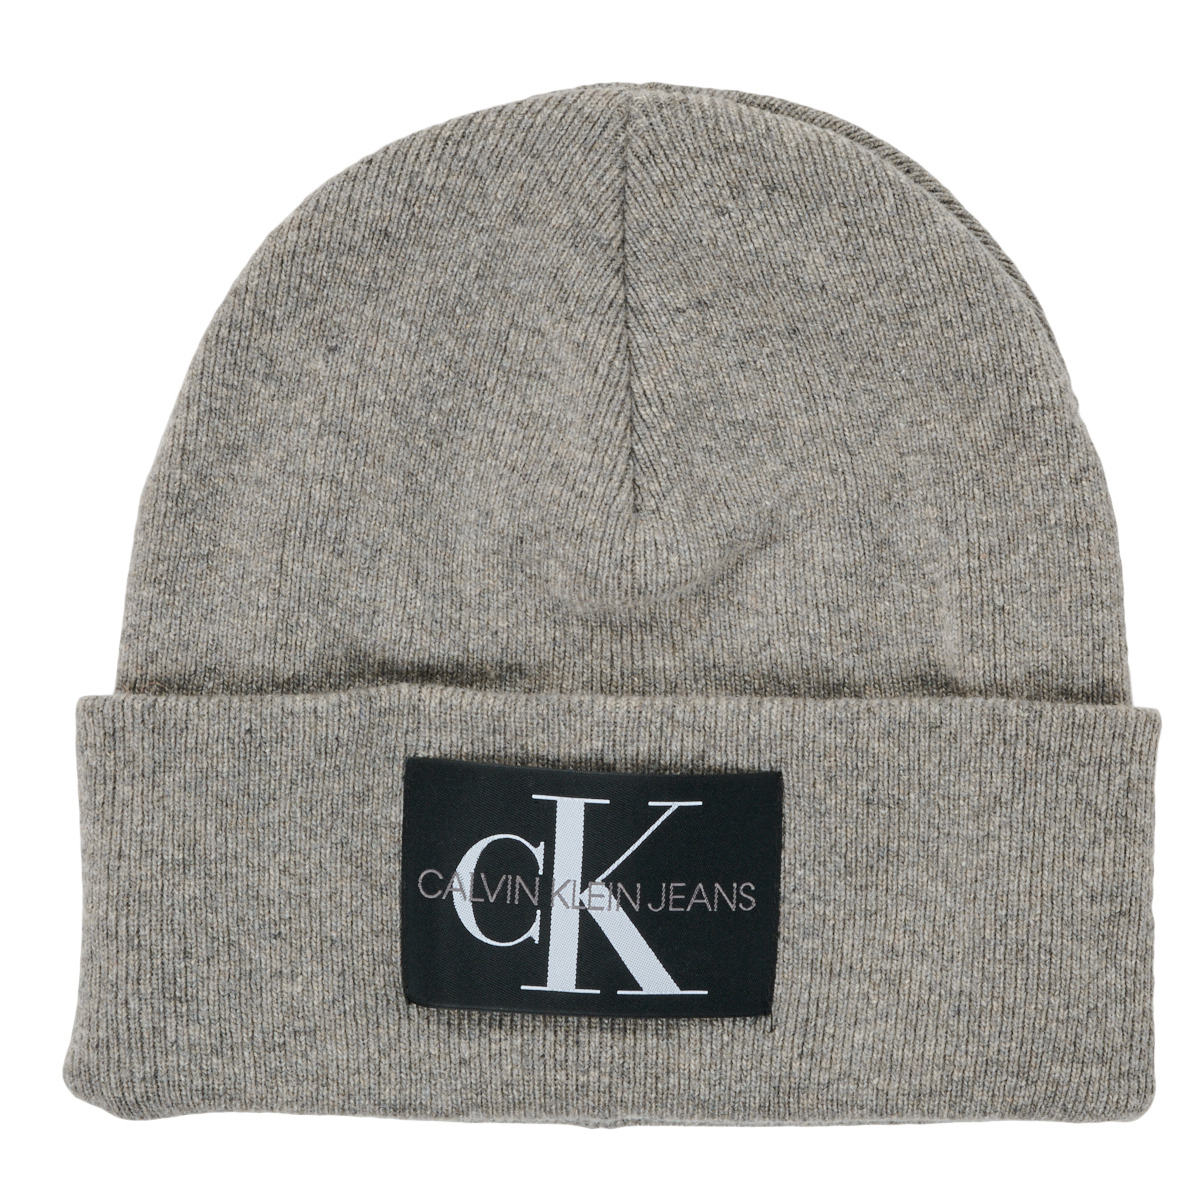 Calvin Klein Jeans MONOLOGO BEANIE hats - accessories | Grey Clothes Free ! Spartoo NET Men - delivery NON-RIB PATCH